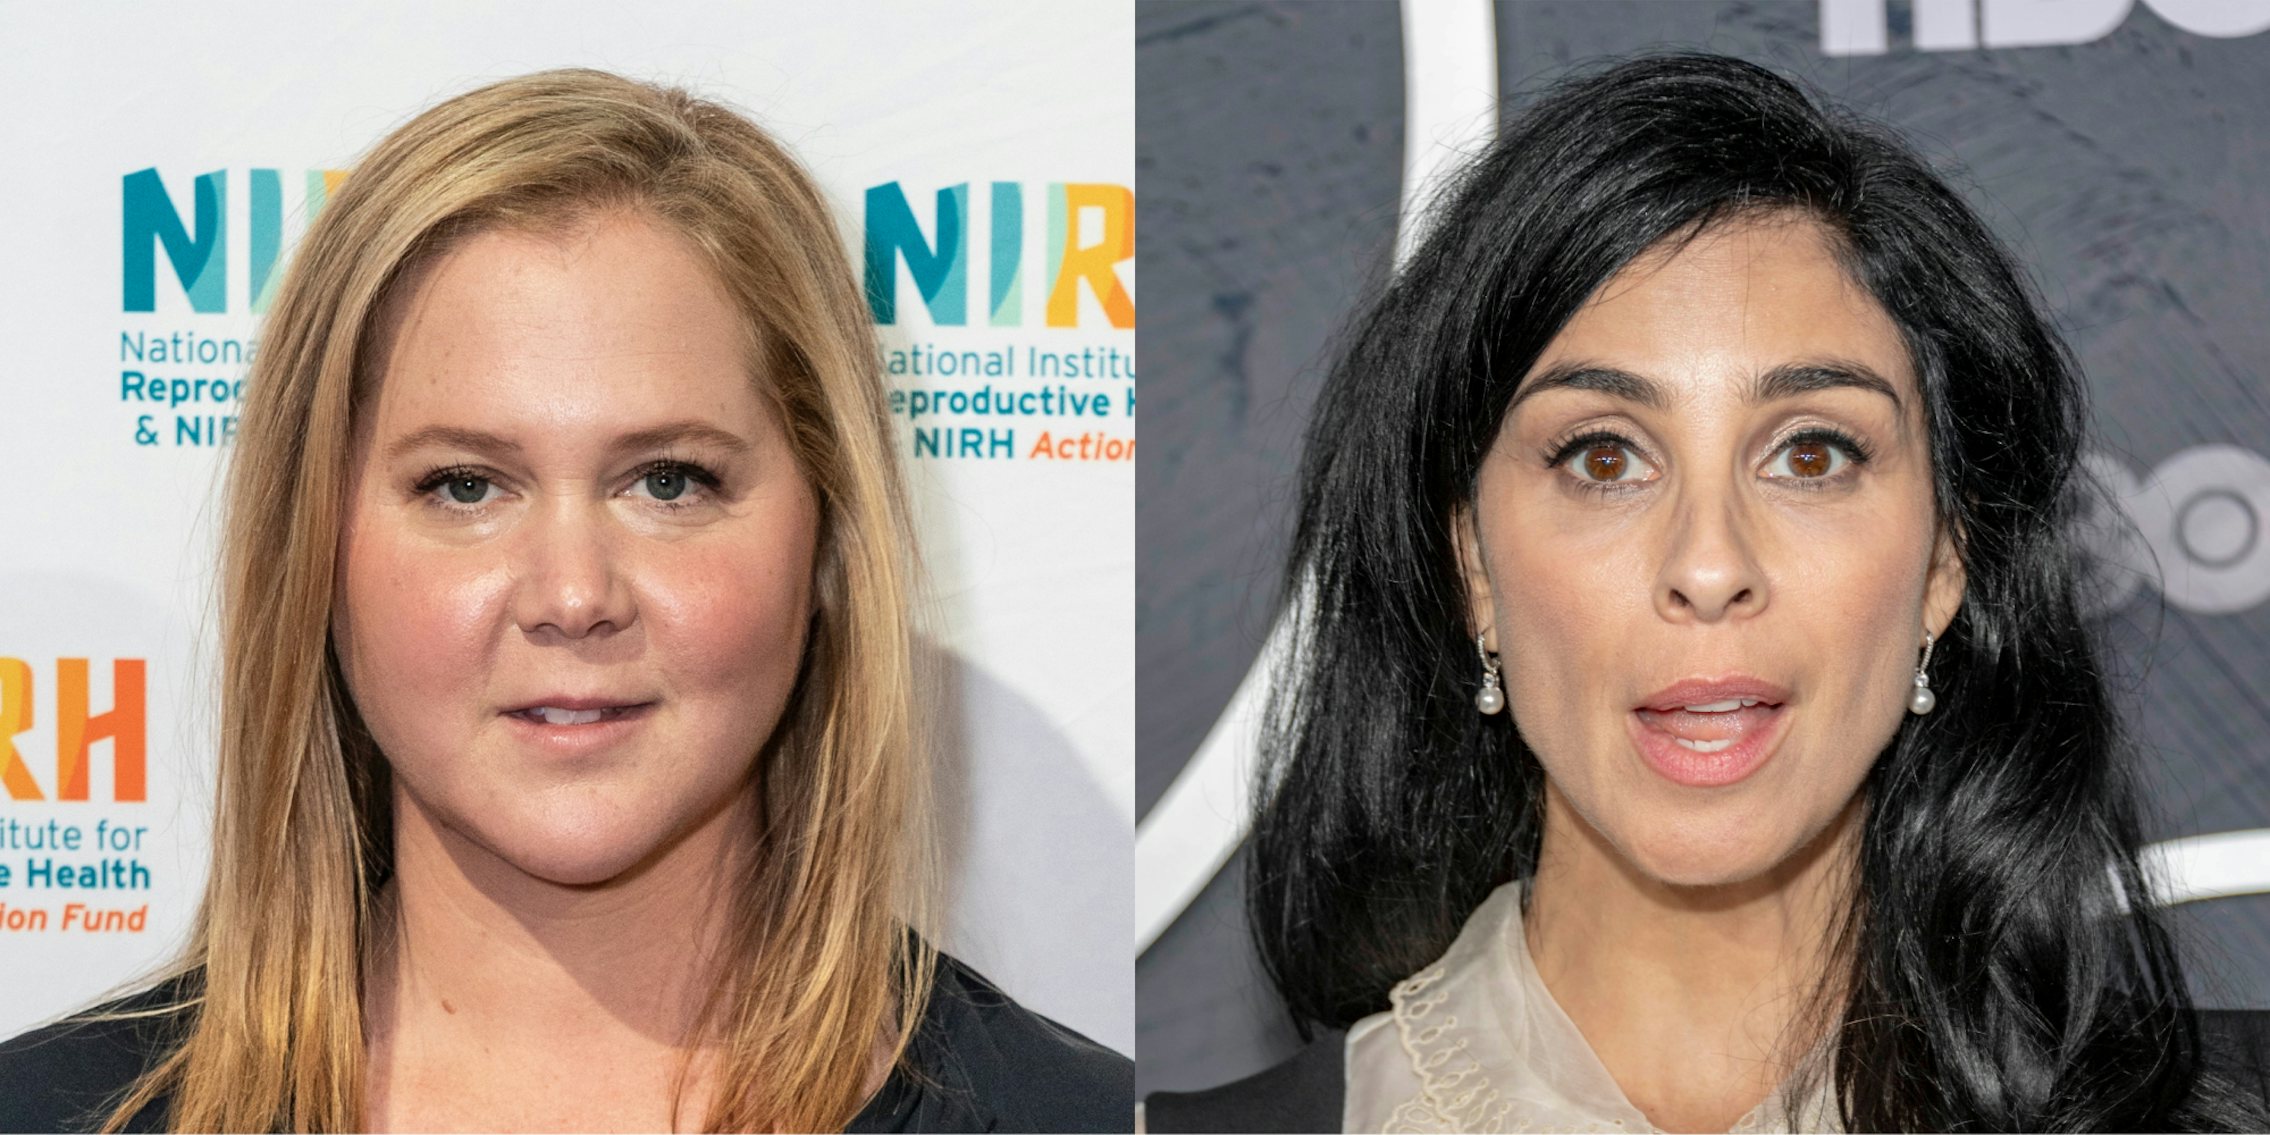 Amy Schumer in front of white background (l) Sarah Silverman in front of grey background (r)